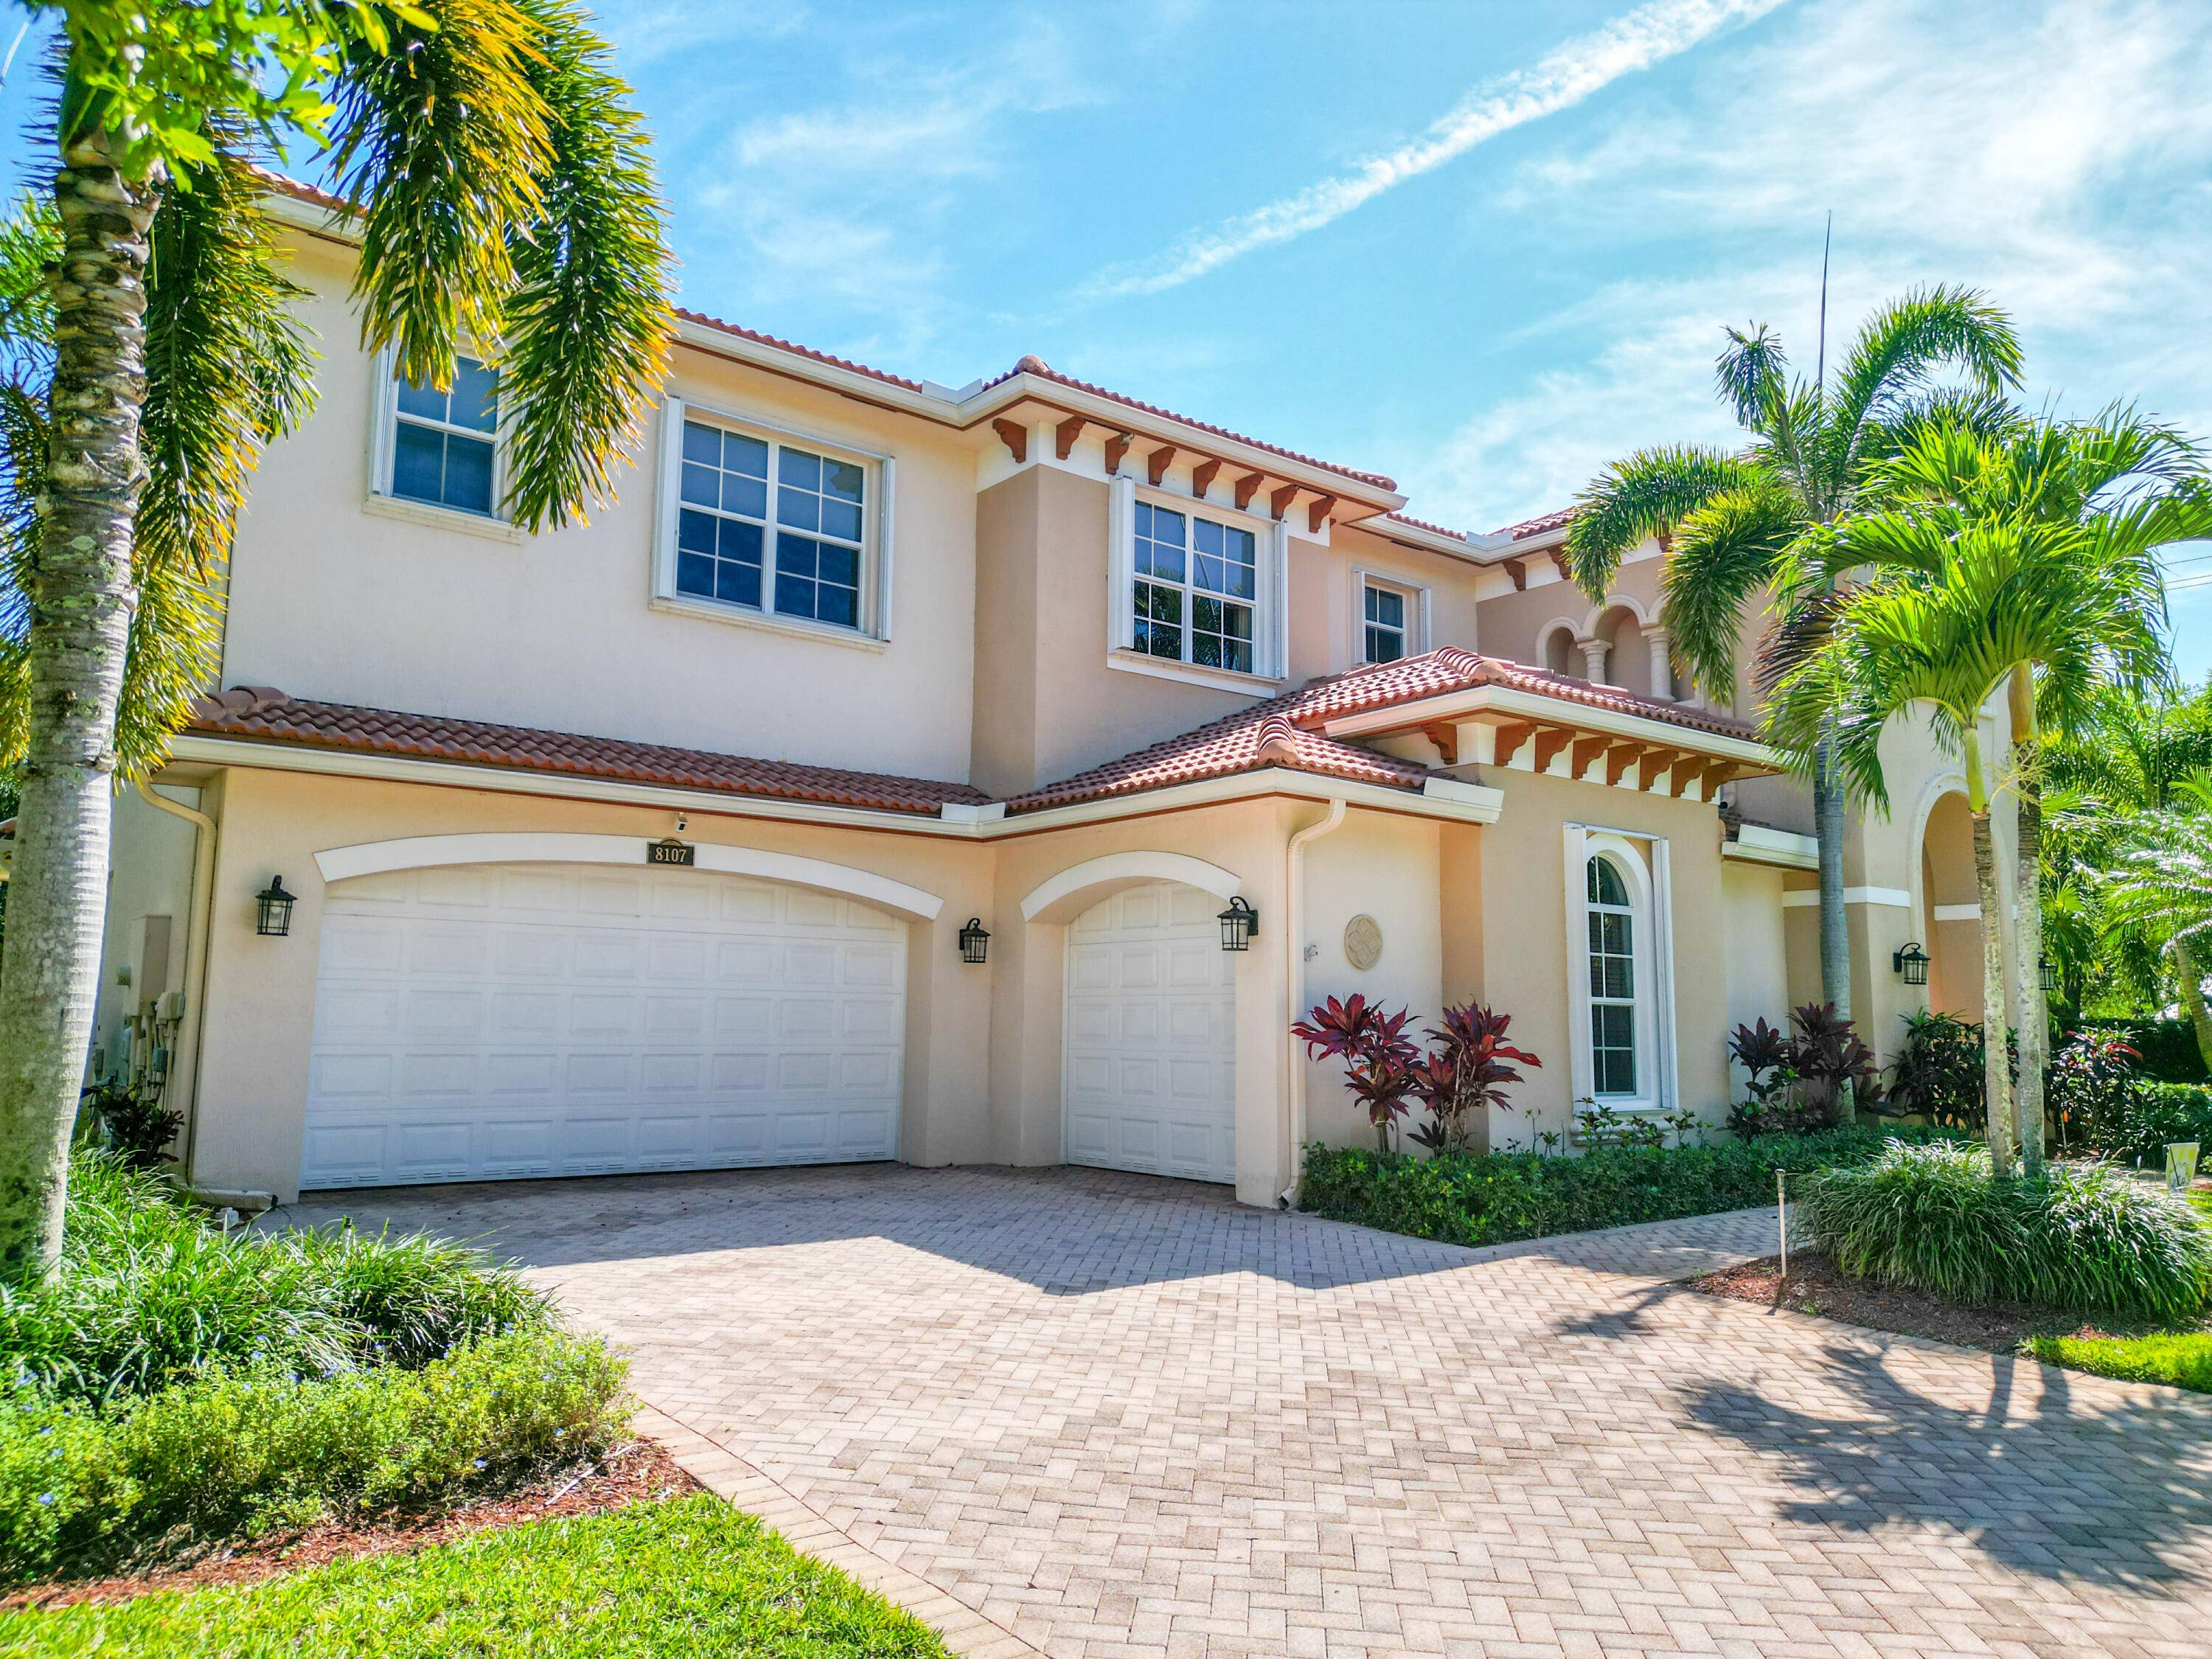 Stunning 6 bedroom 6 bath pool home nestled in the heart of Palm Beach County in West Palm Beach Florida.